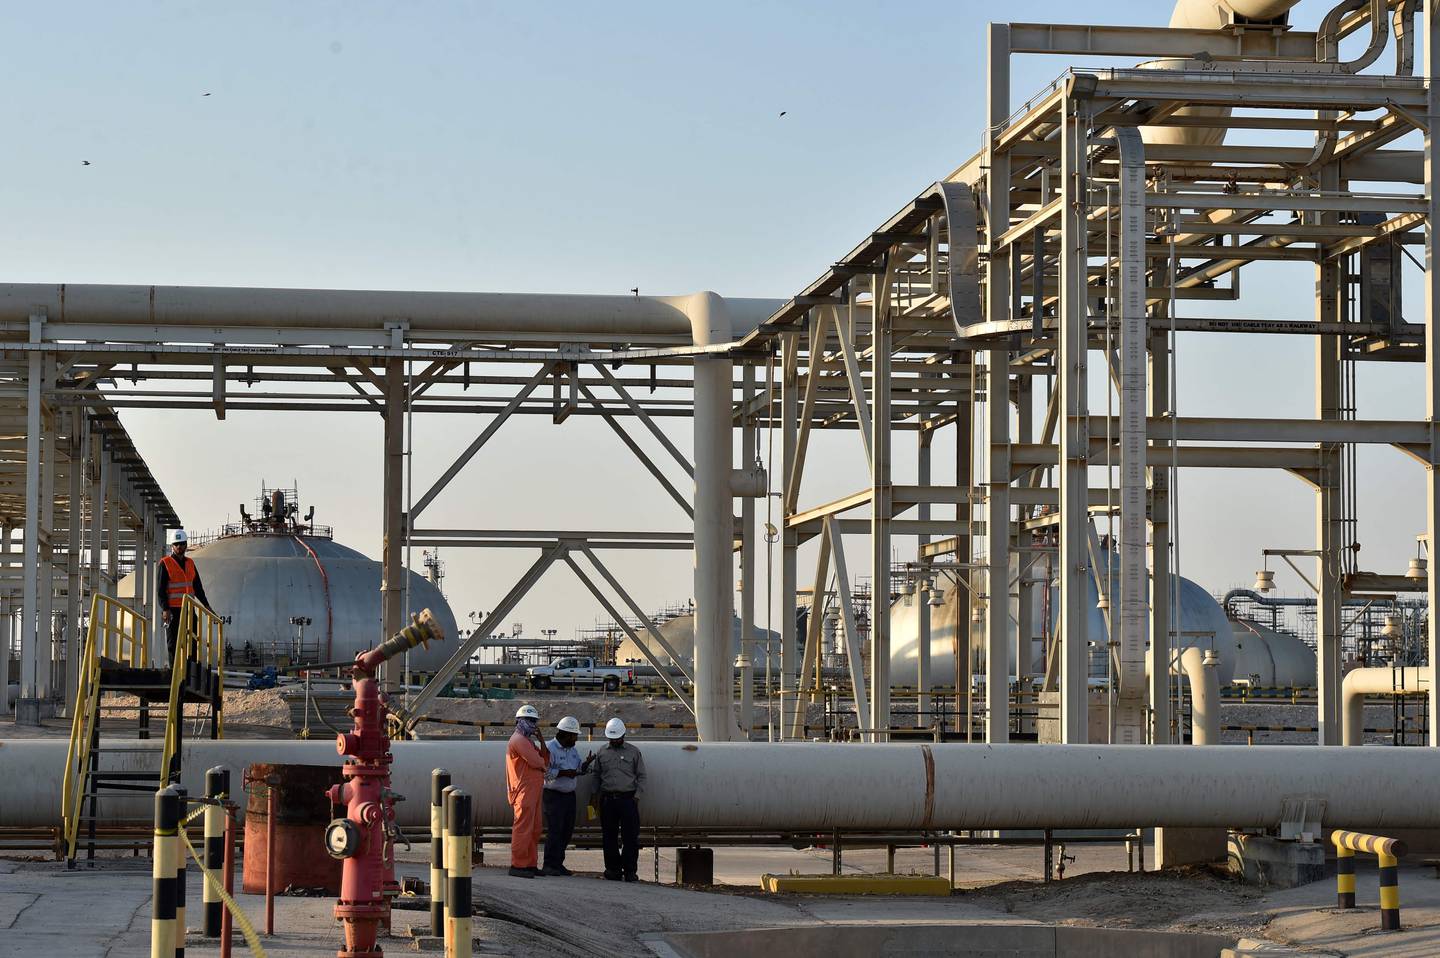 A partial view of Saudi Aramco's Abqaiq oil processing plant. AFP